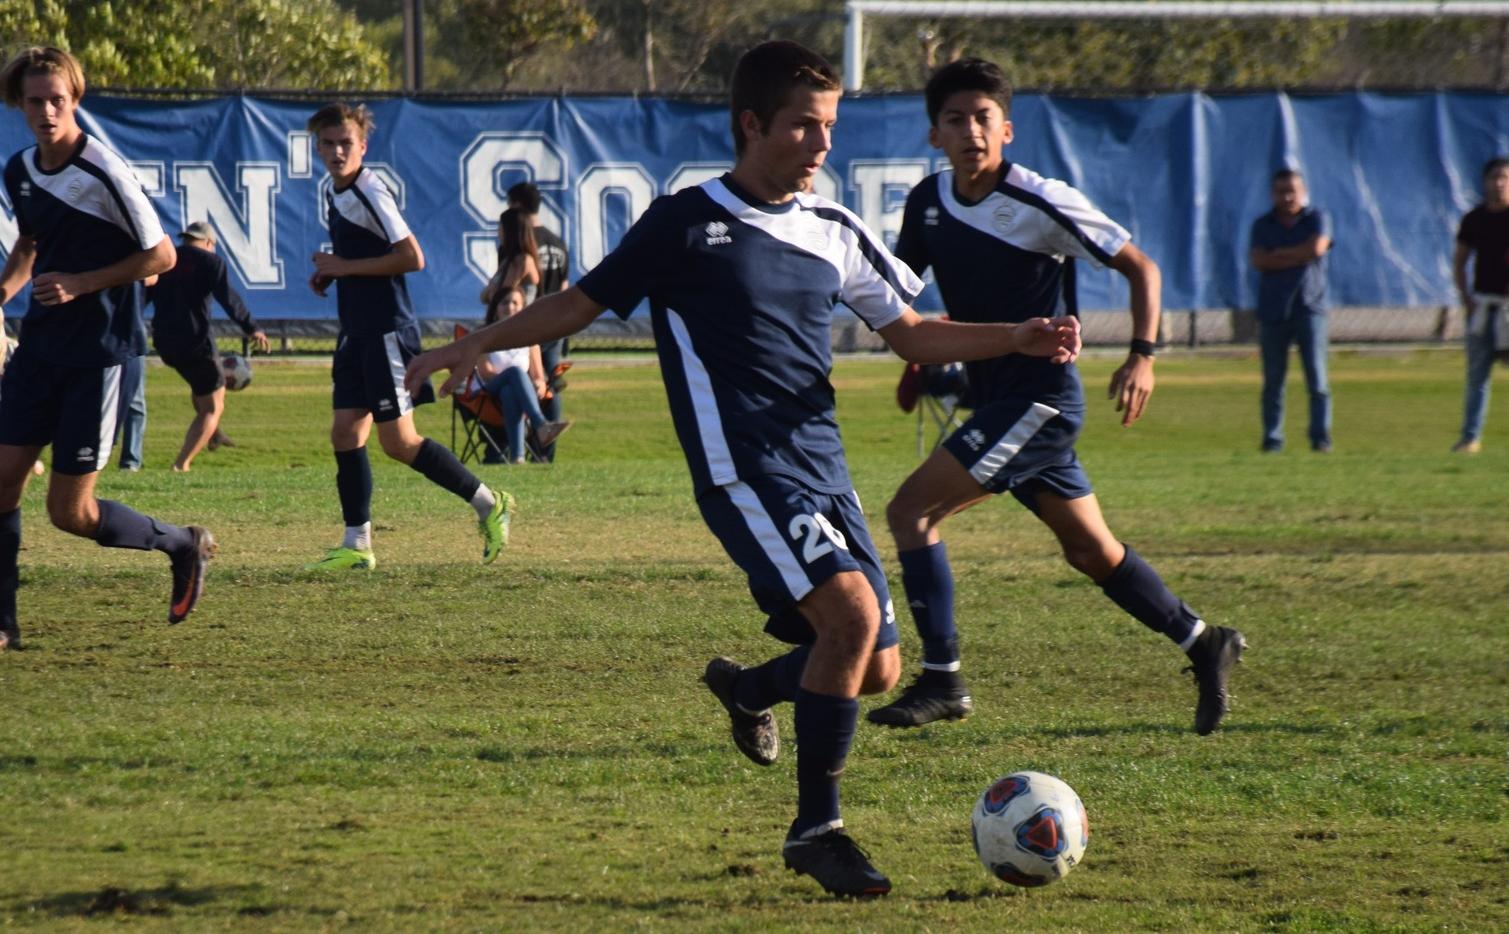 Men's soccer team storms back to earn regional playoff win